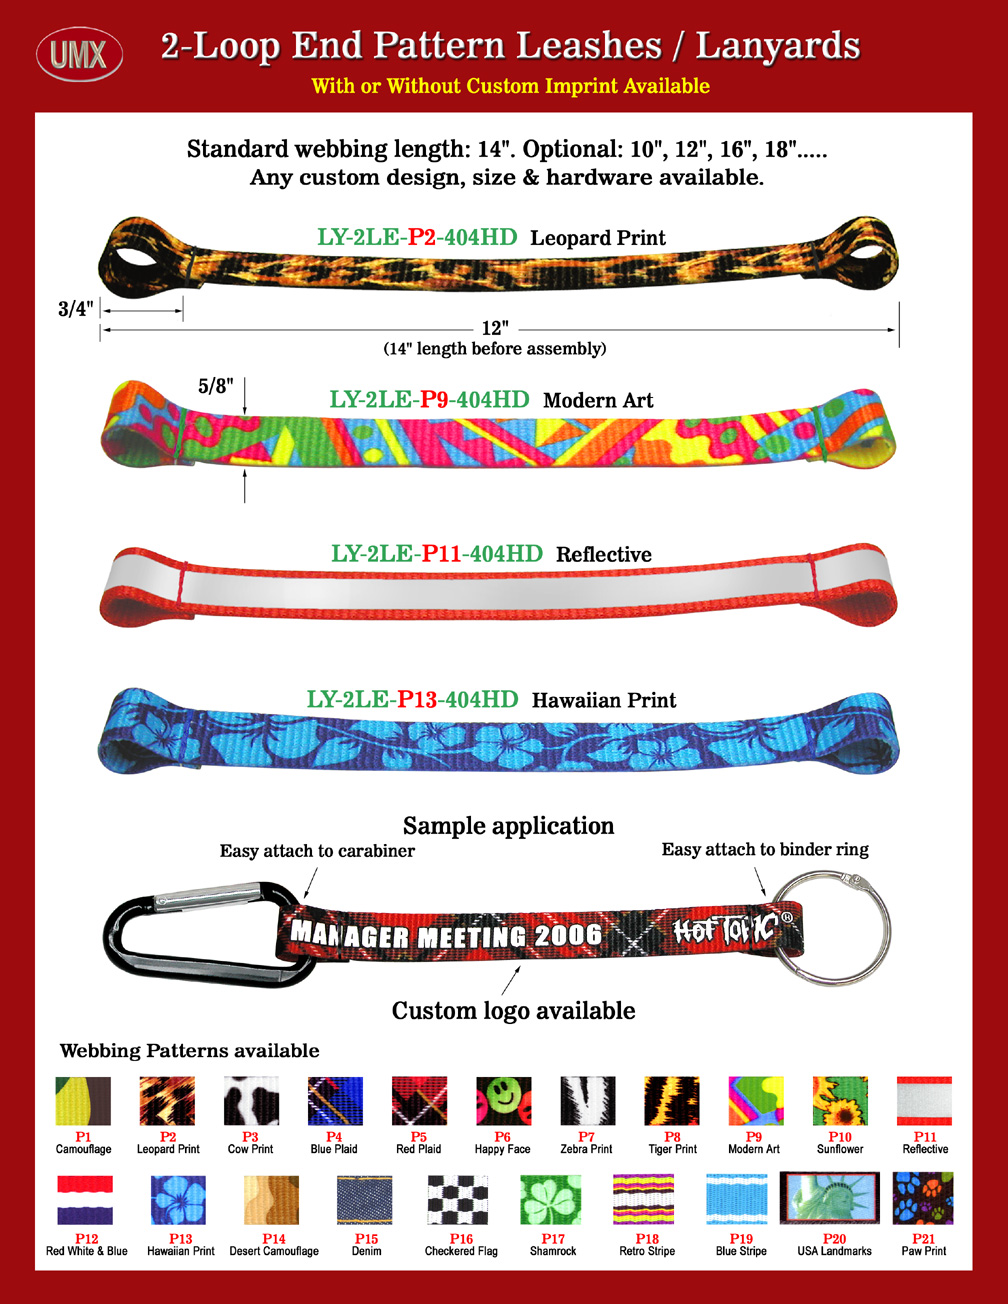 5/8" Cool Pre-Printed Theme 2-Loop Leashes With Double Loops.